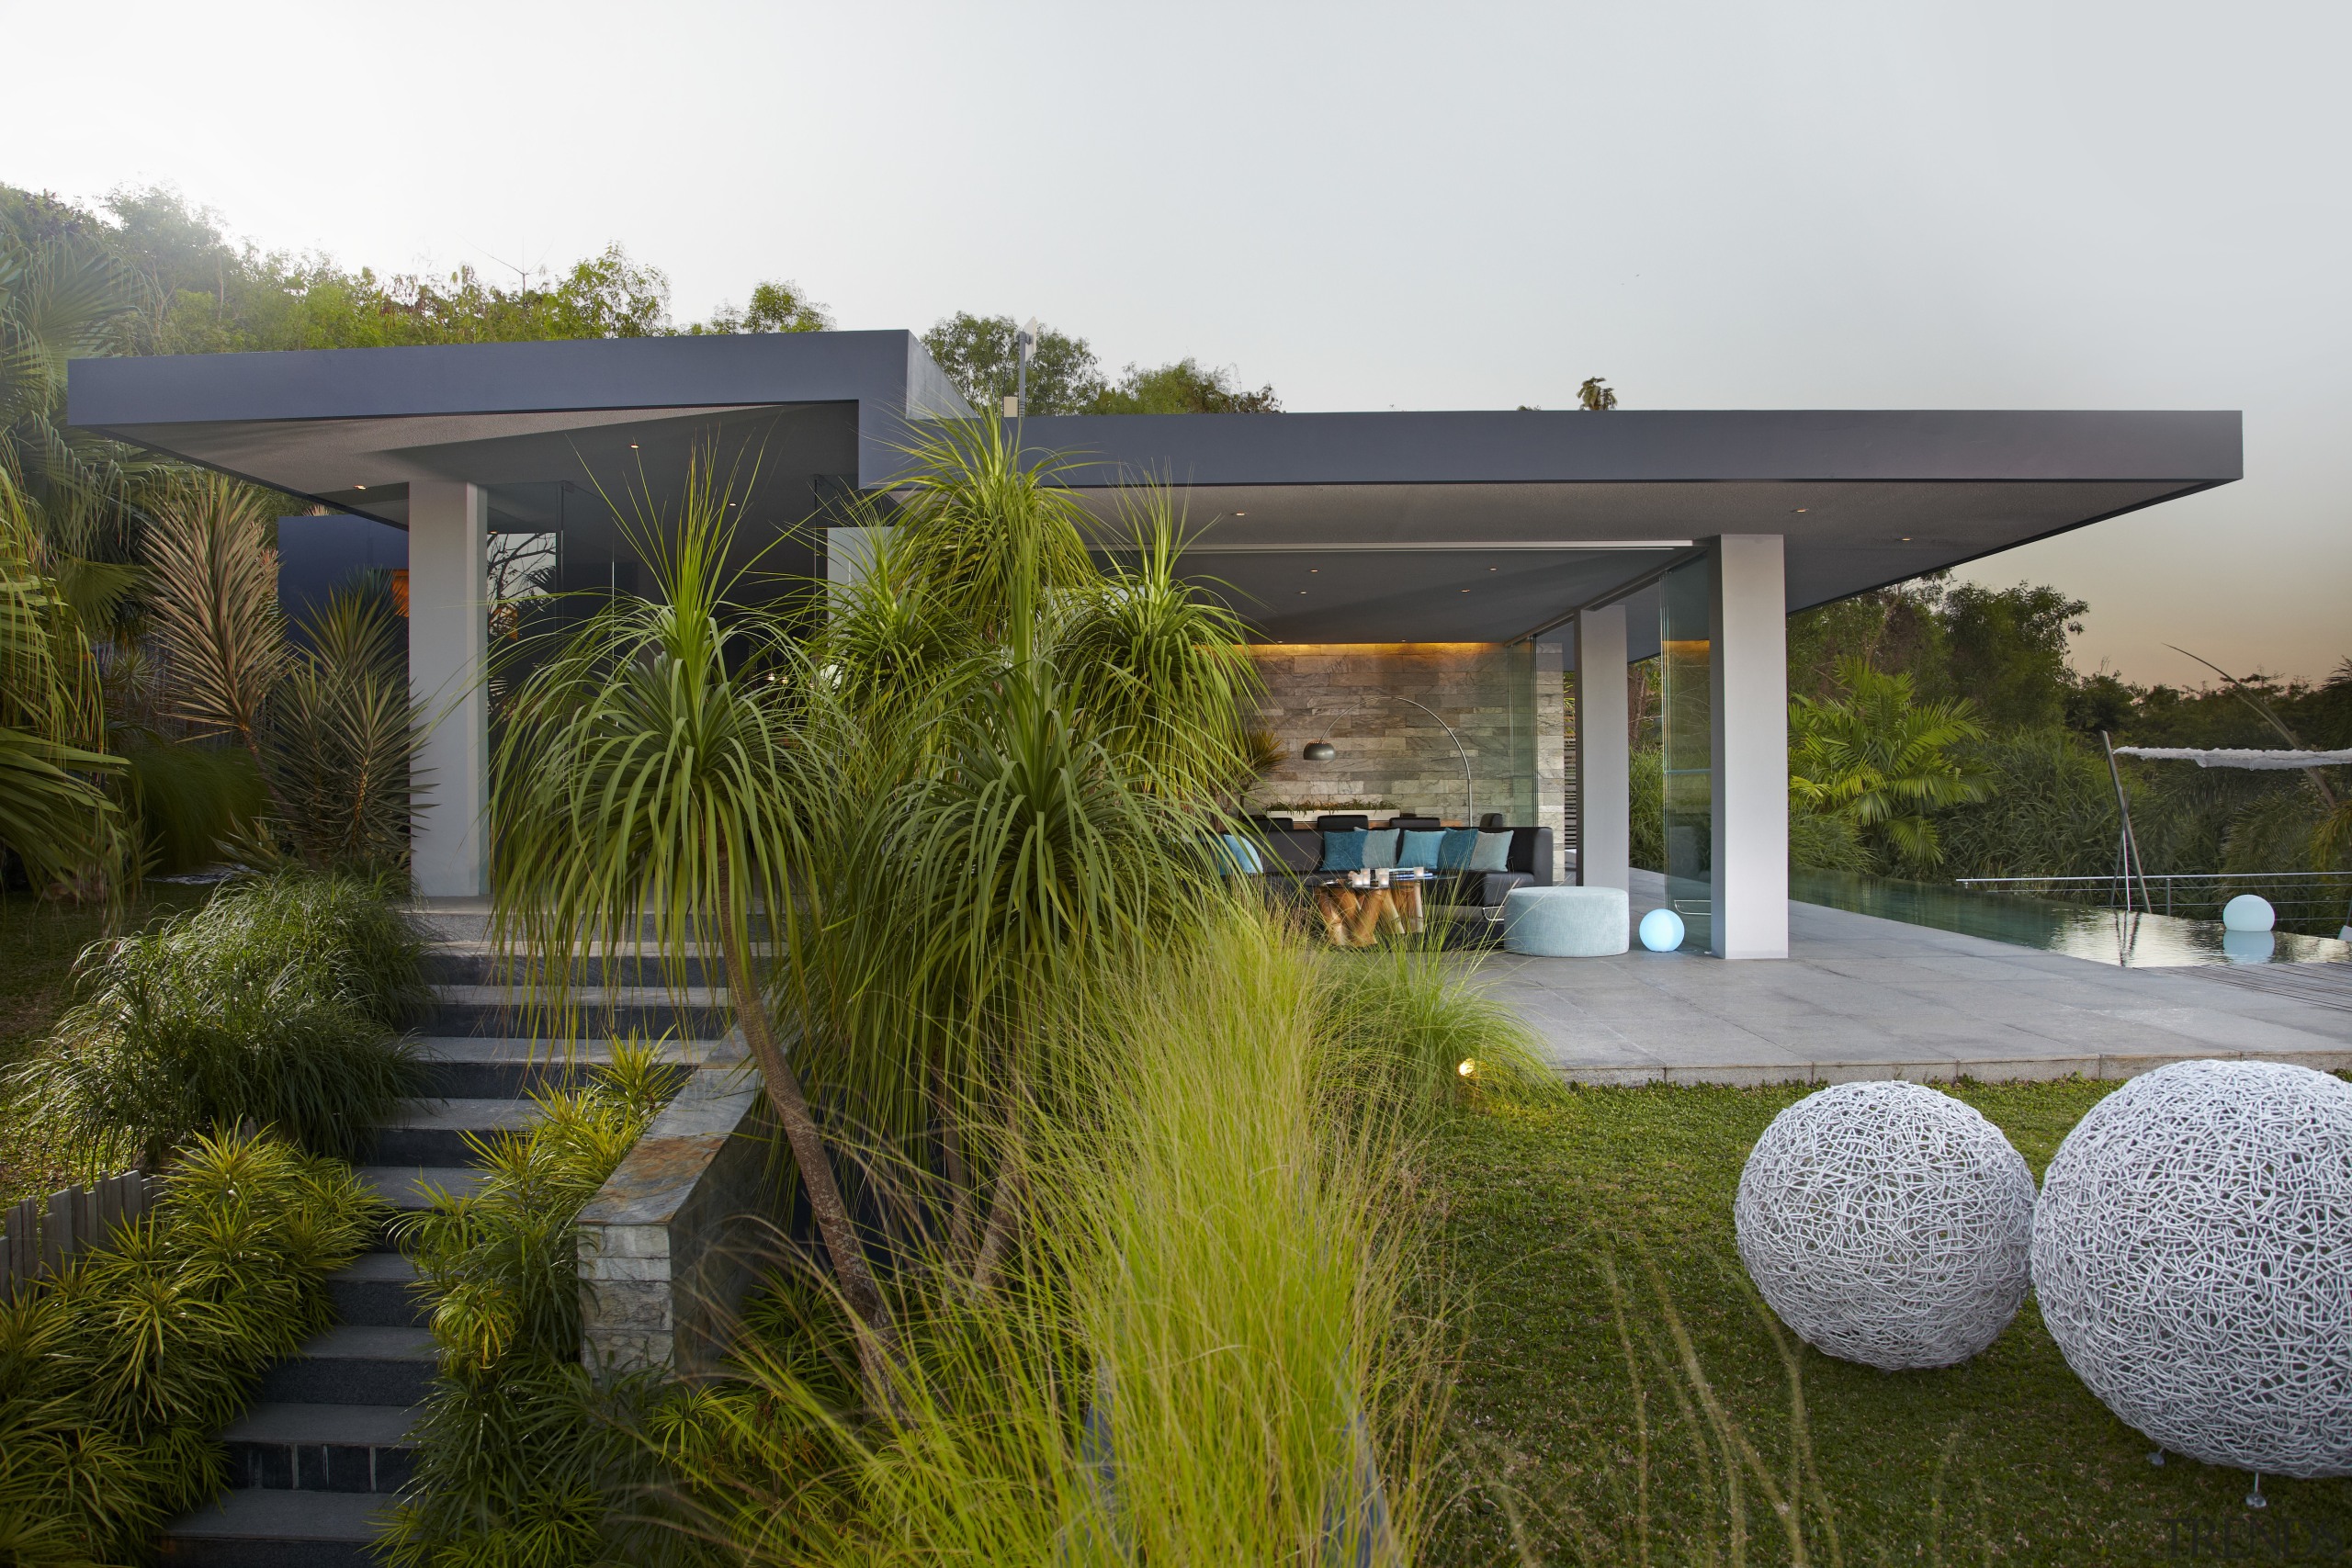 The Bali holiday homes was designed by Alessandro architecture, estate, grass, home, house, landscape, real estate, brown, white